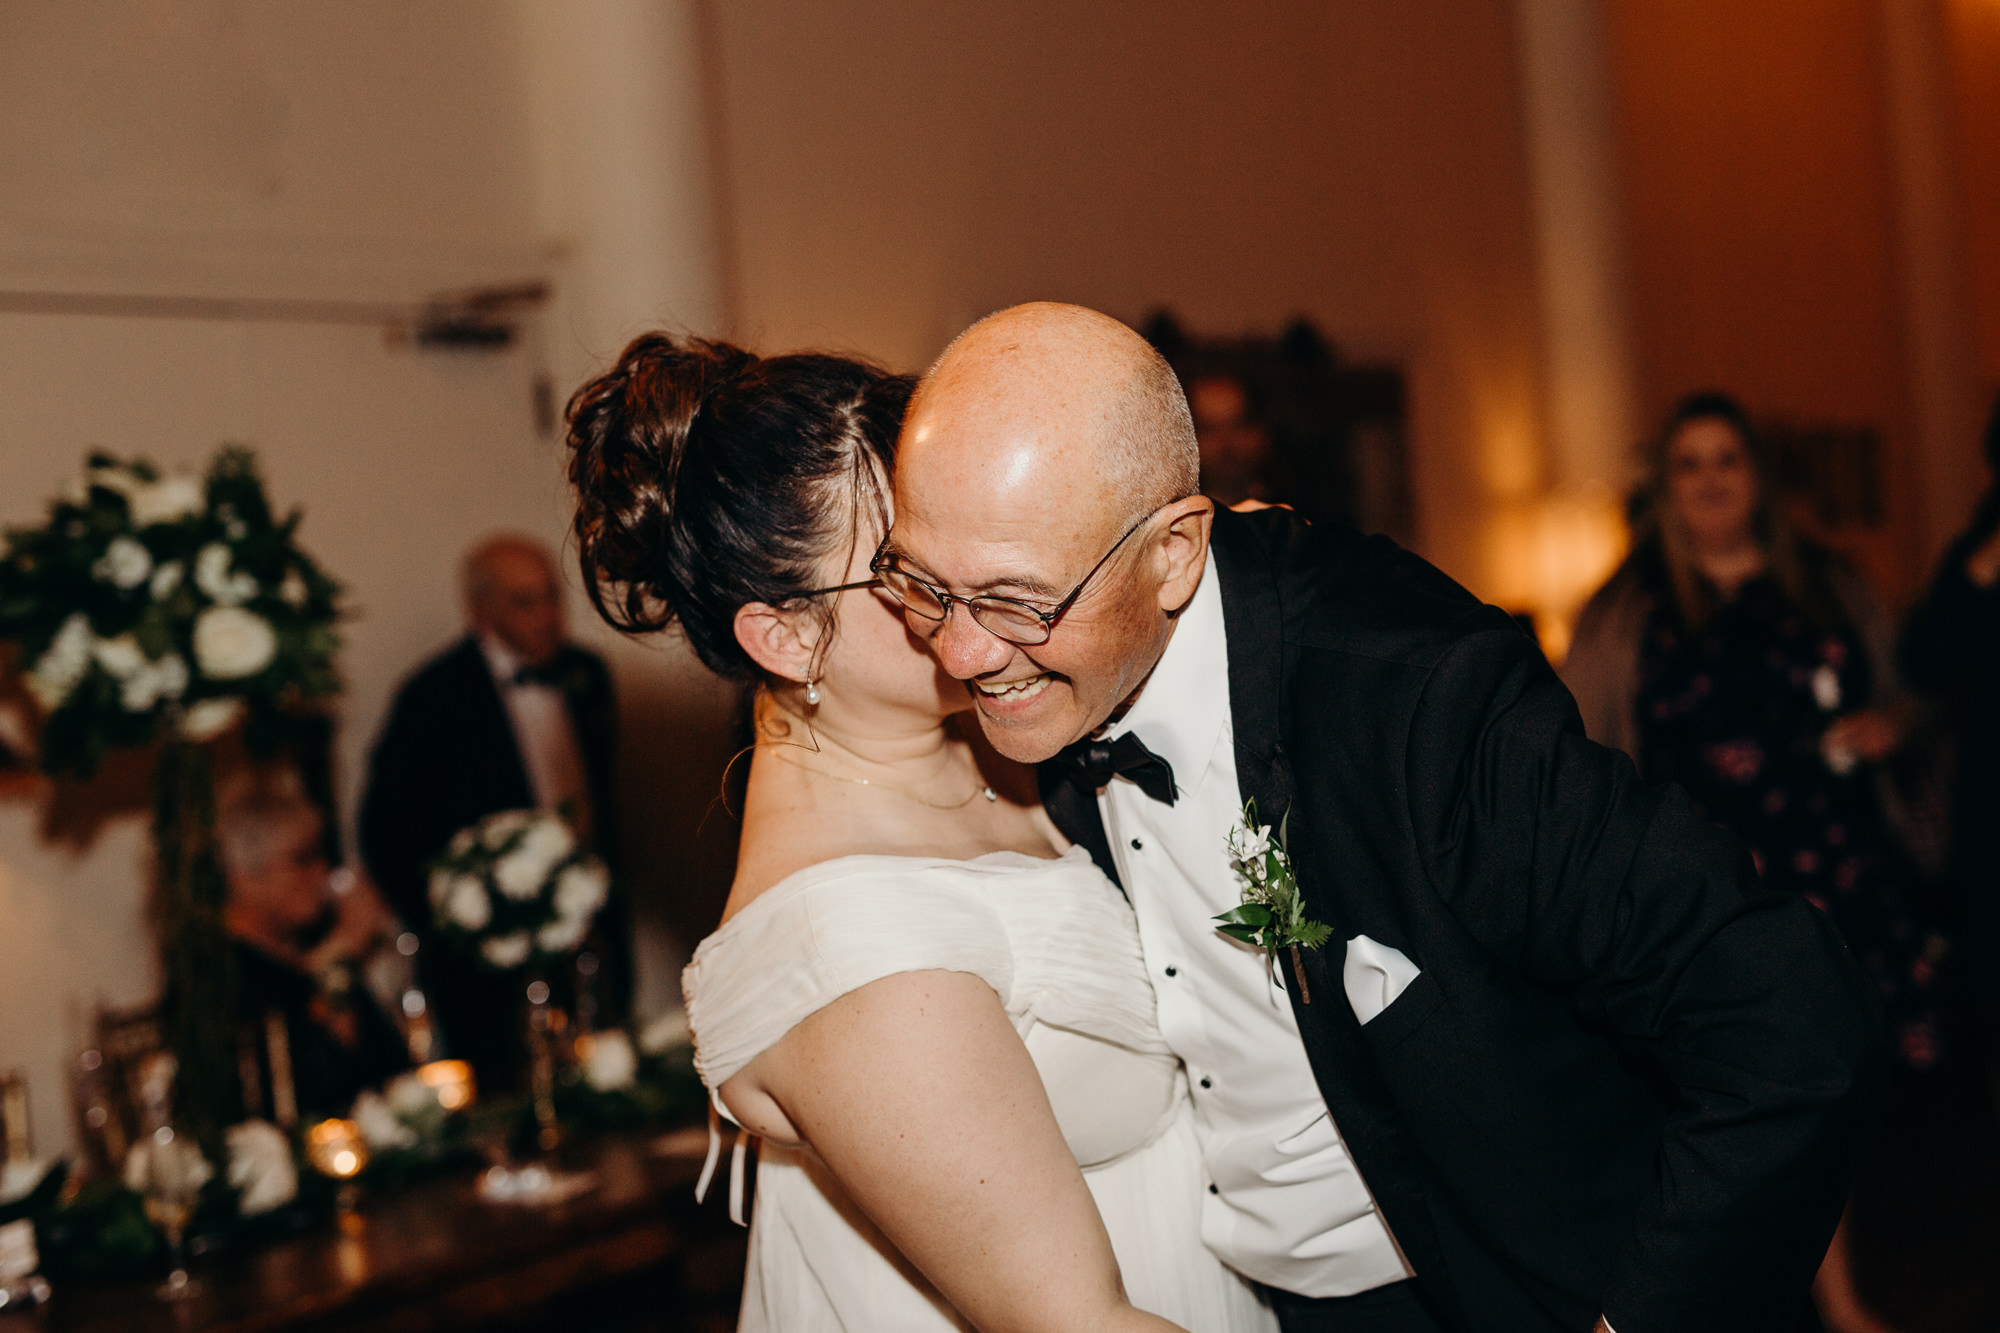 a bride dances with her father during her wedding reception at studio in rochester, ny